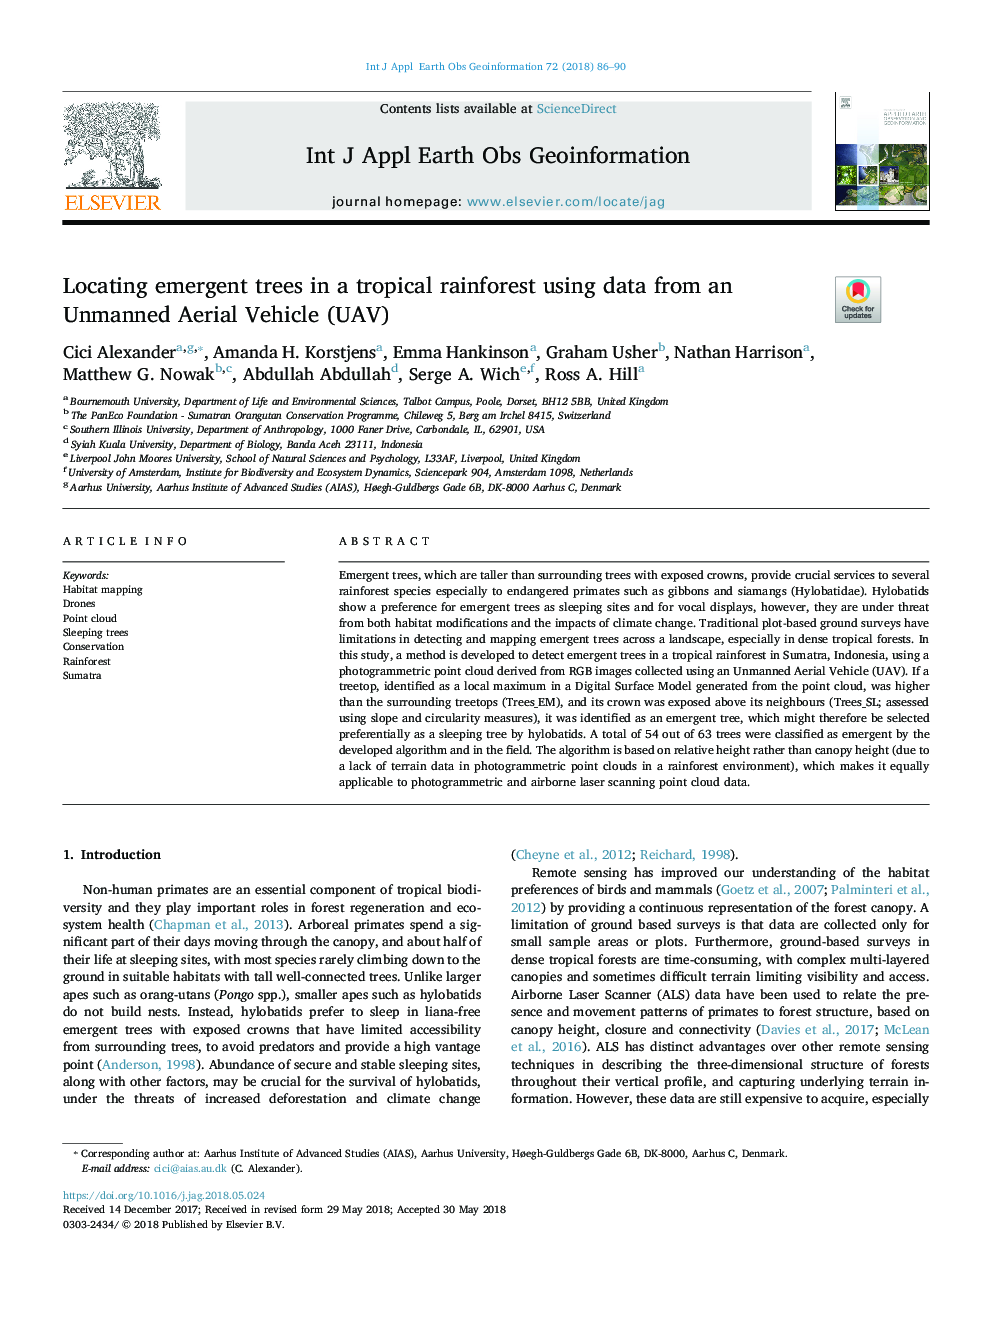 Locating emergent trees in a tropical rainforest using data from an Unmanned Aerial Vehicle (UAV)